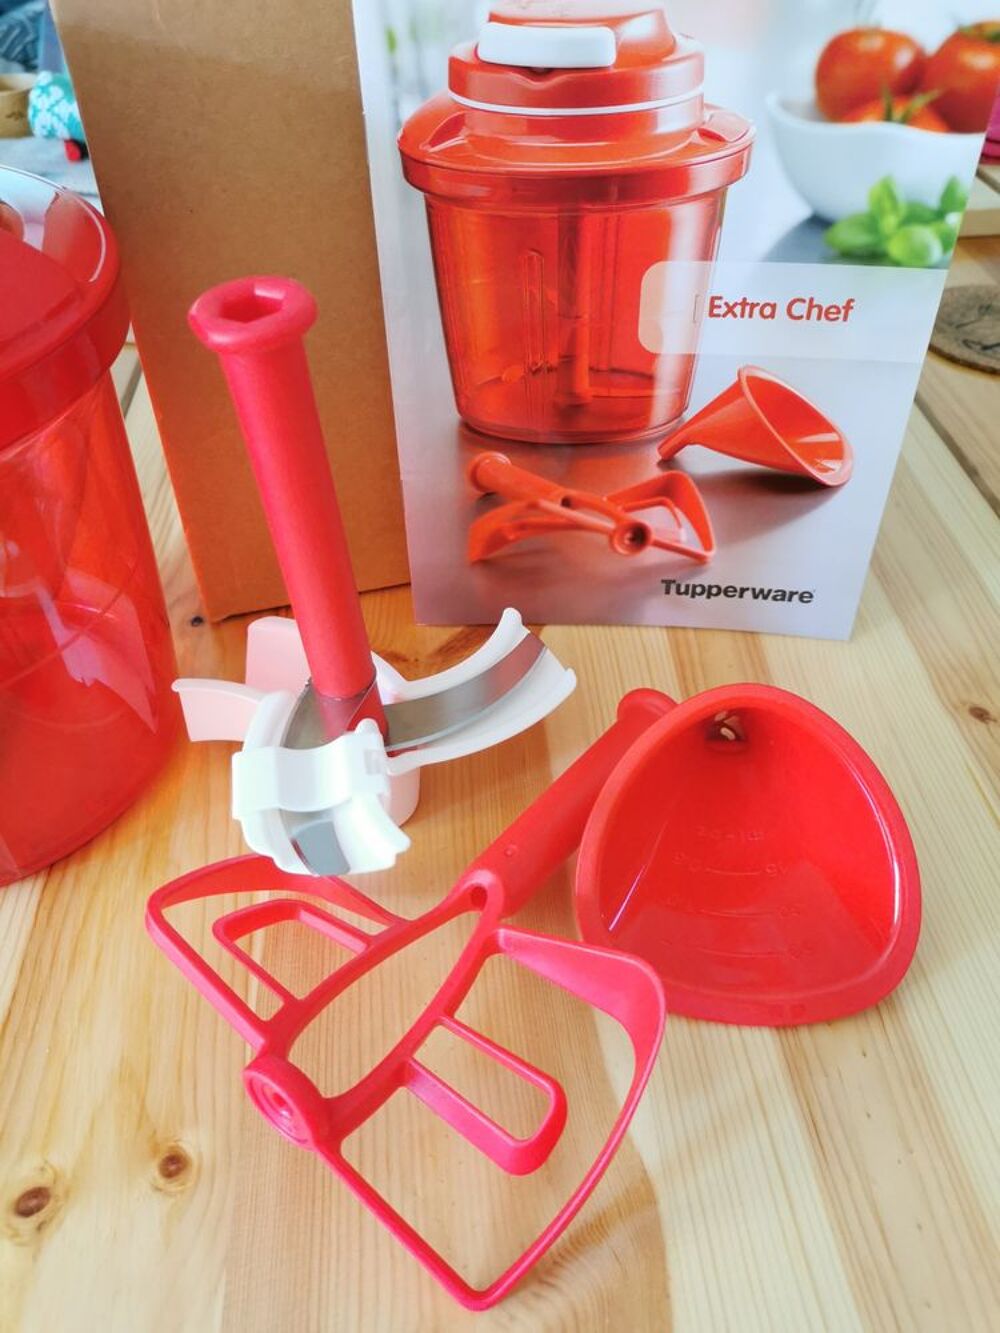 Extra Chef, Tupperware Electromnager